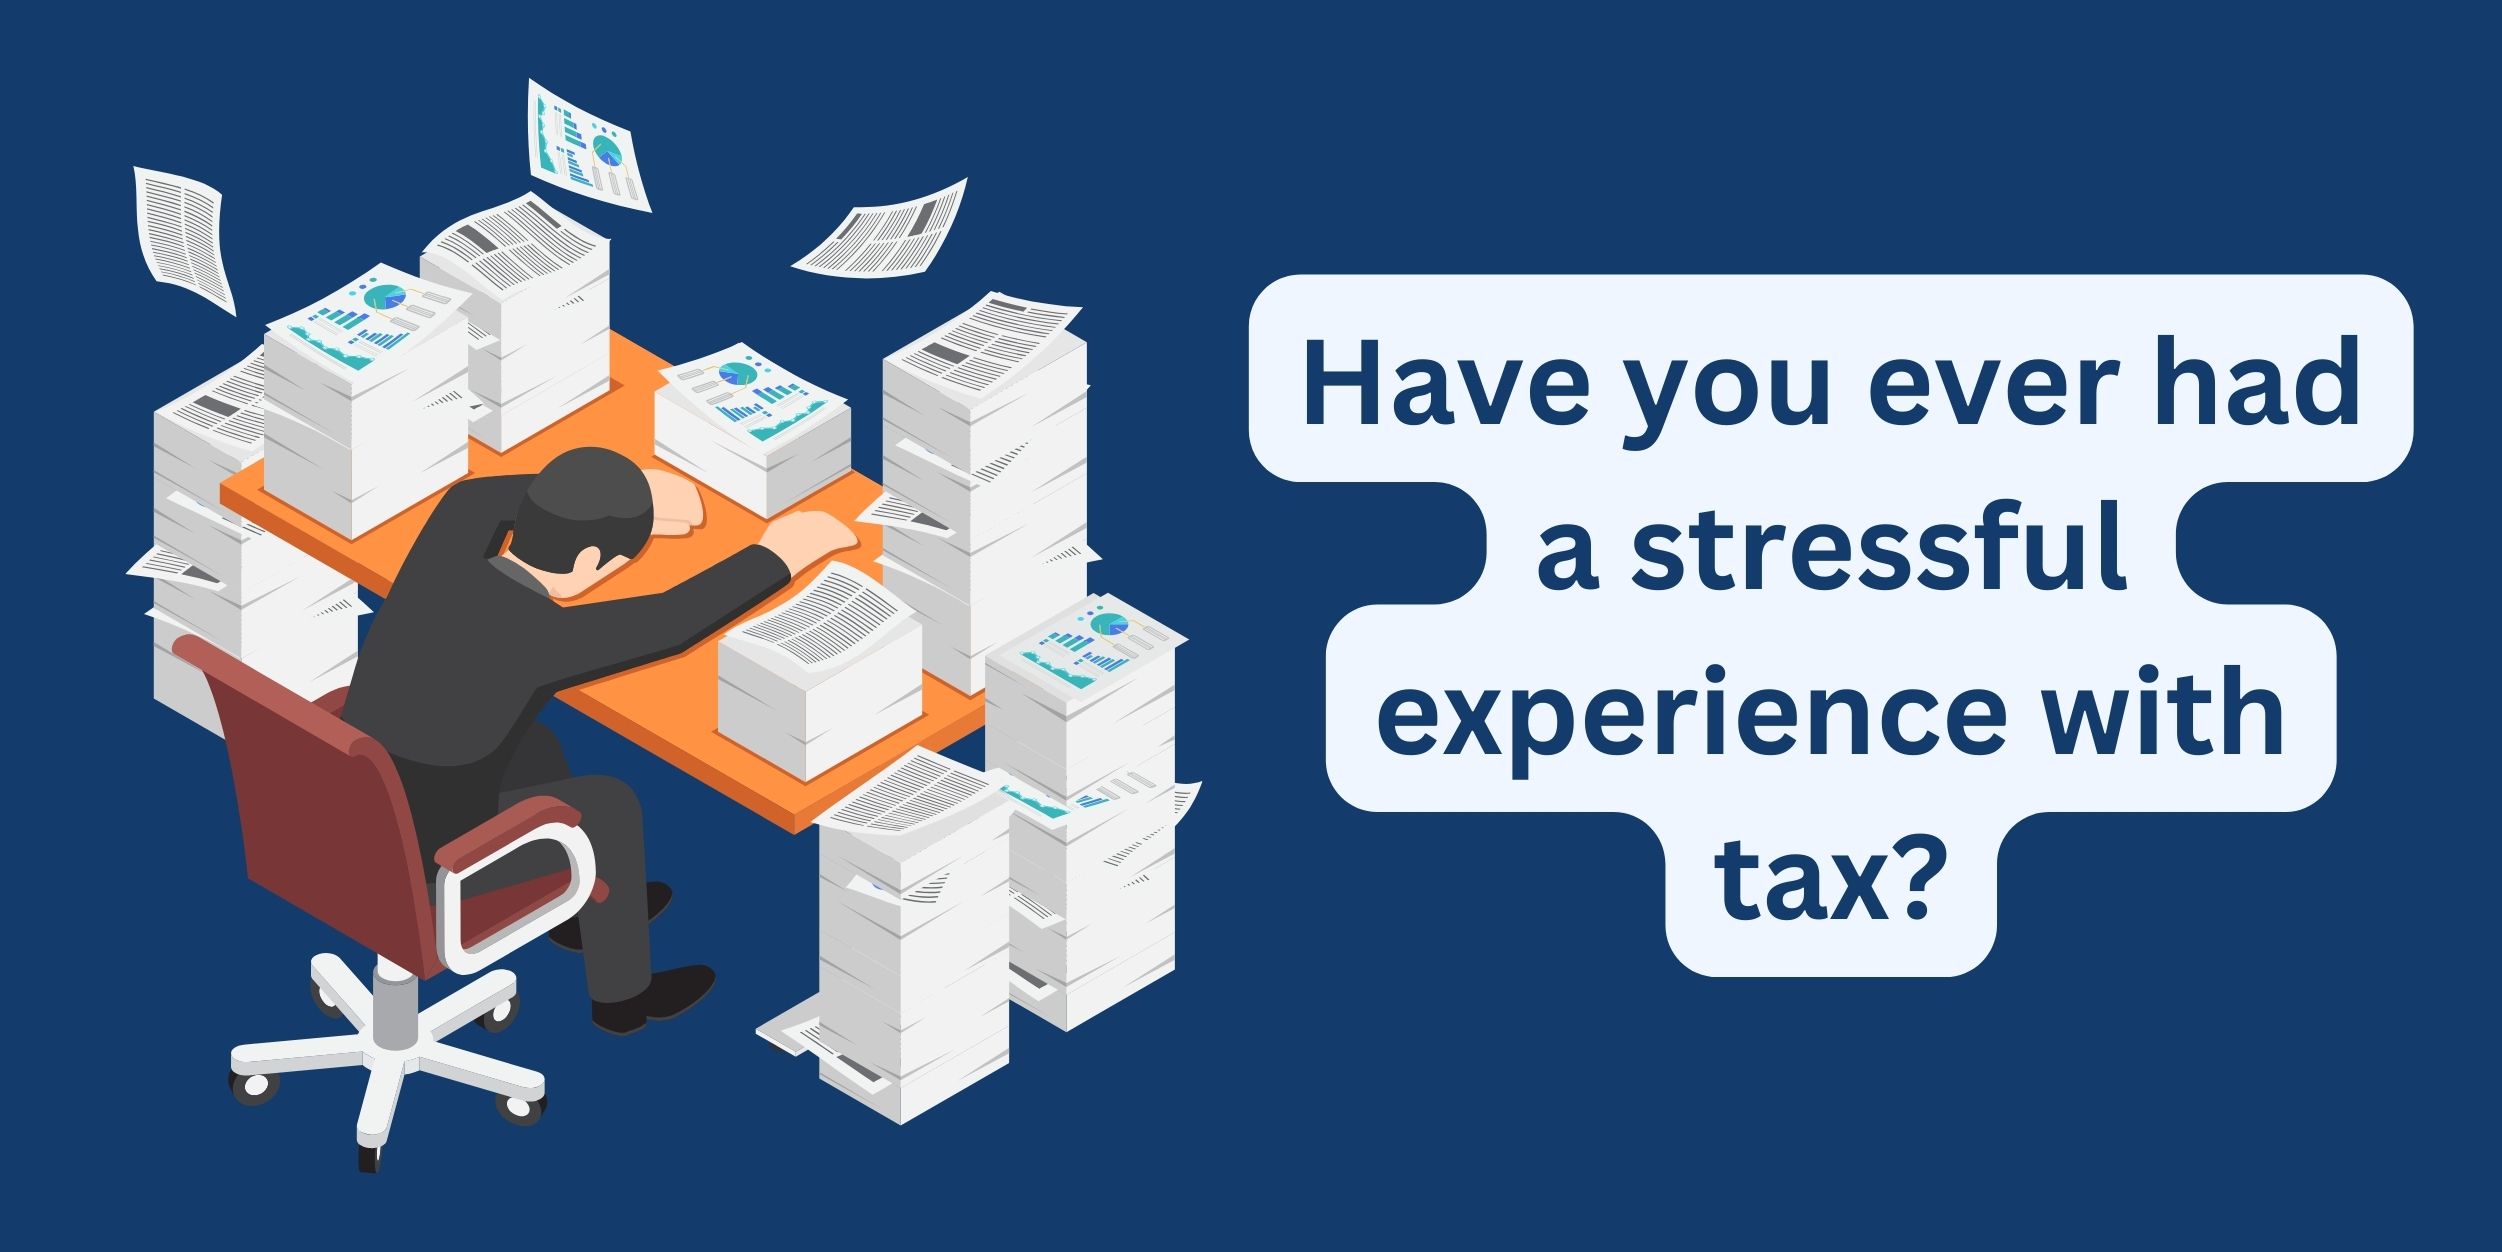 Have you ever had a stressful experience with tax?